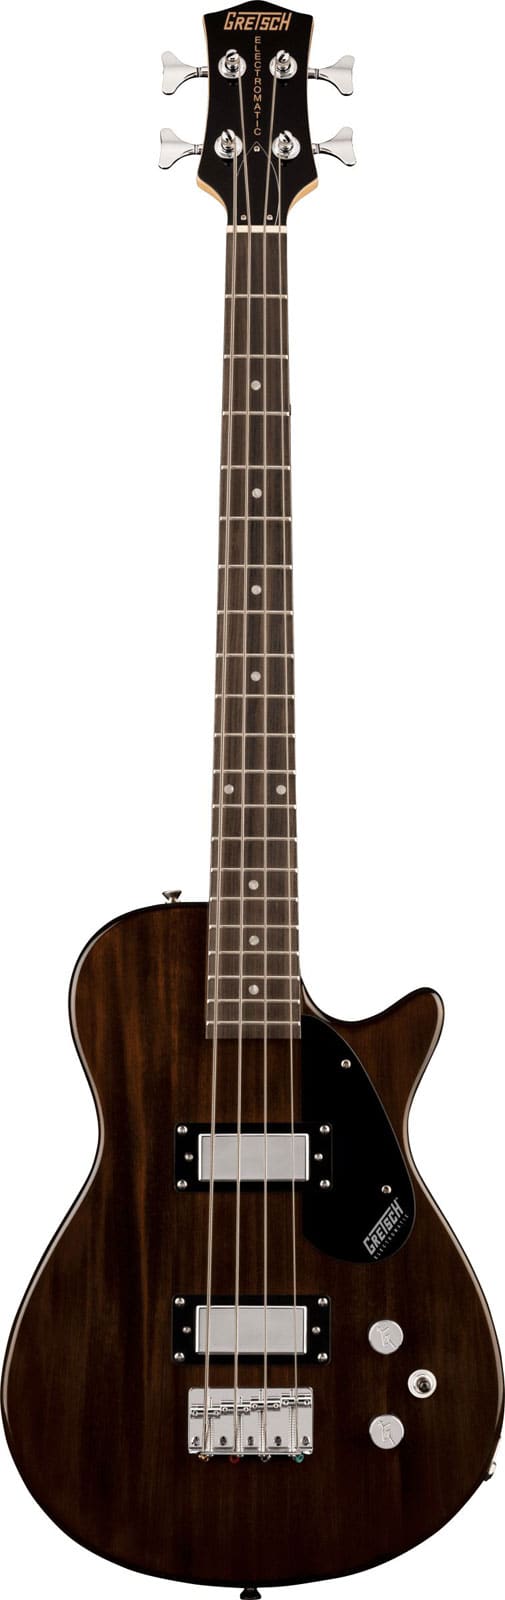 GRETSCH GUITARS G2220 ELECTROMATIC JUNIOR JET BASS II SHORT-SCALE BLACK WLNT IMPERIAL STAIN